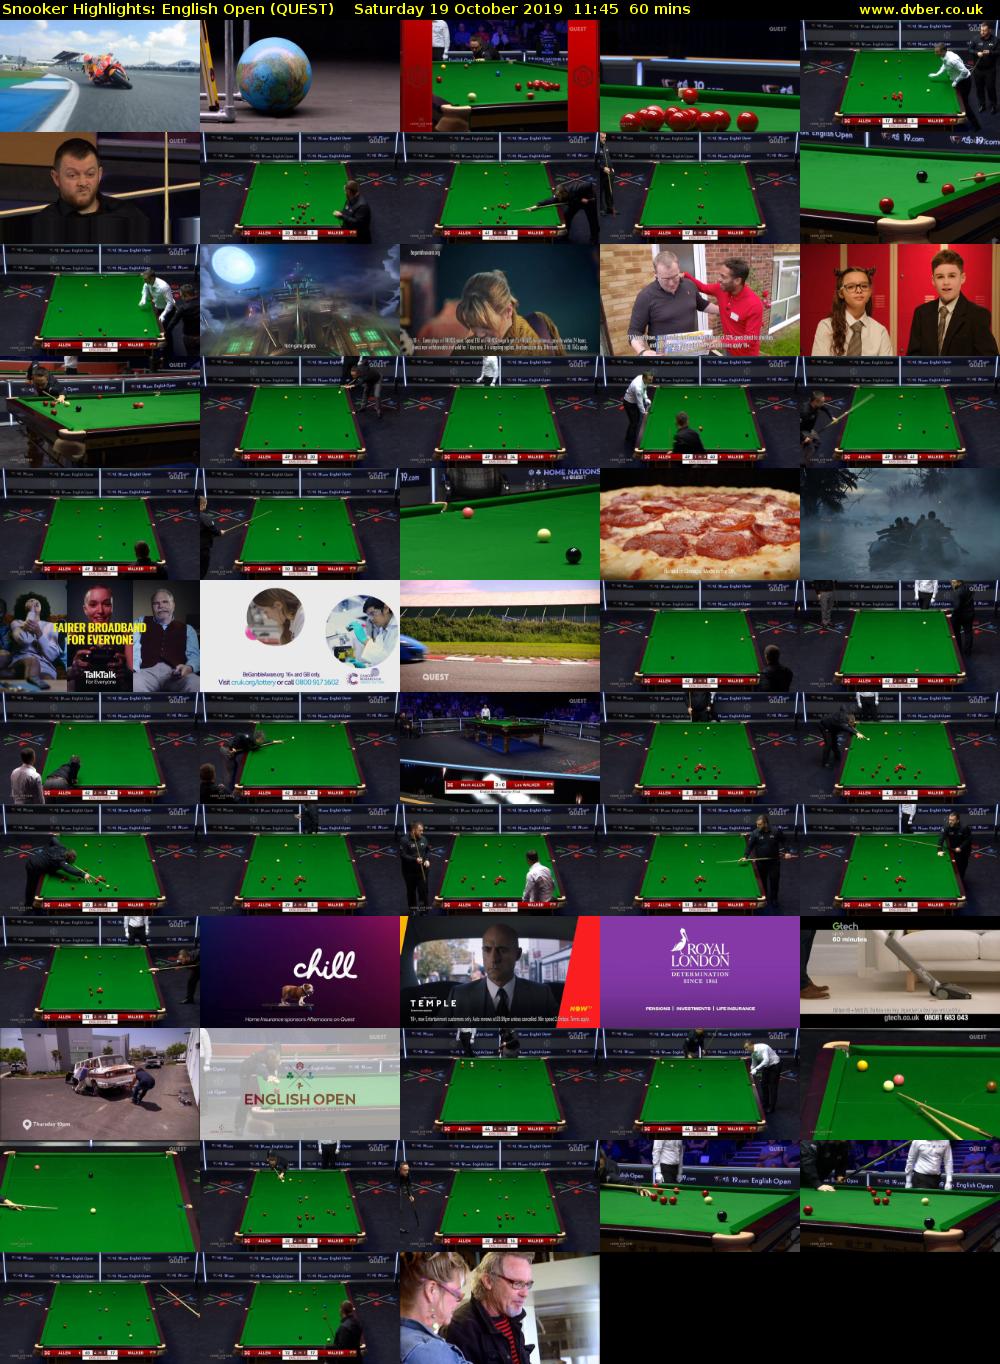 Snooker Highlights: English Open (QUEST) Saturday 19 October 2019 11:45 - 12:45